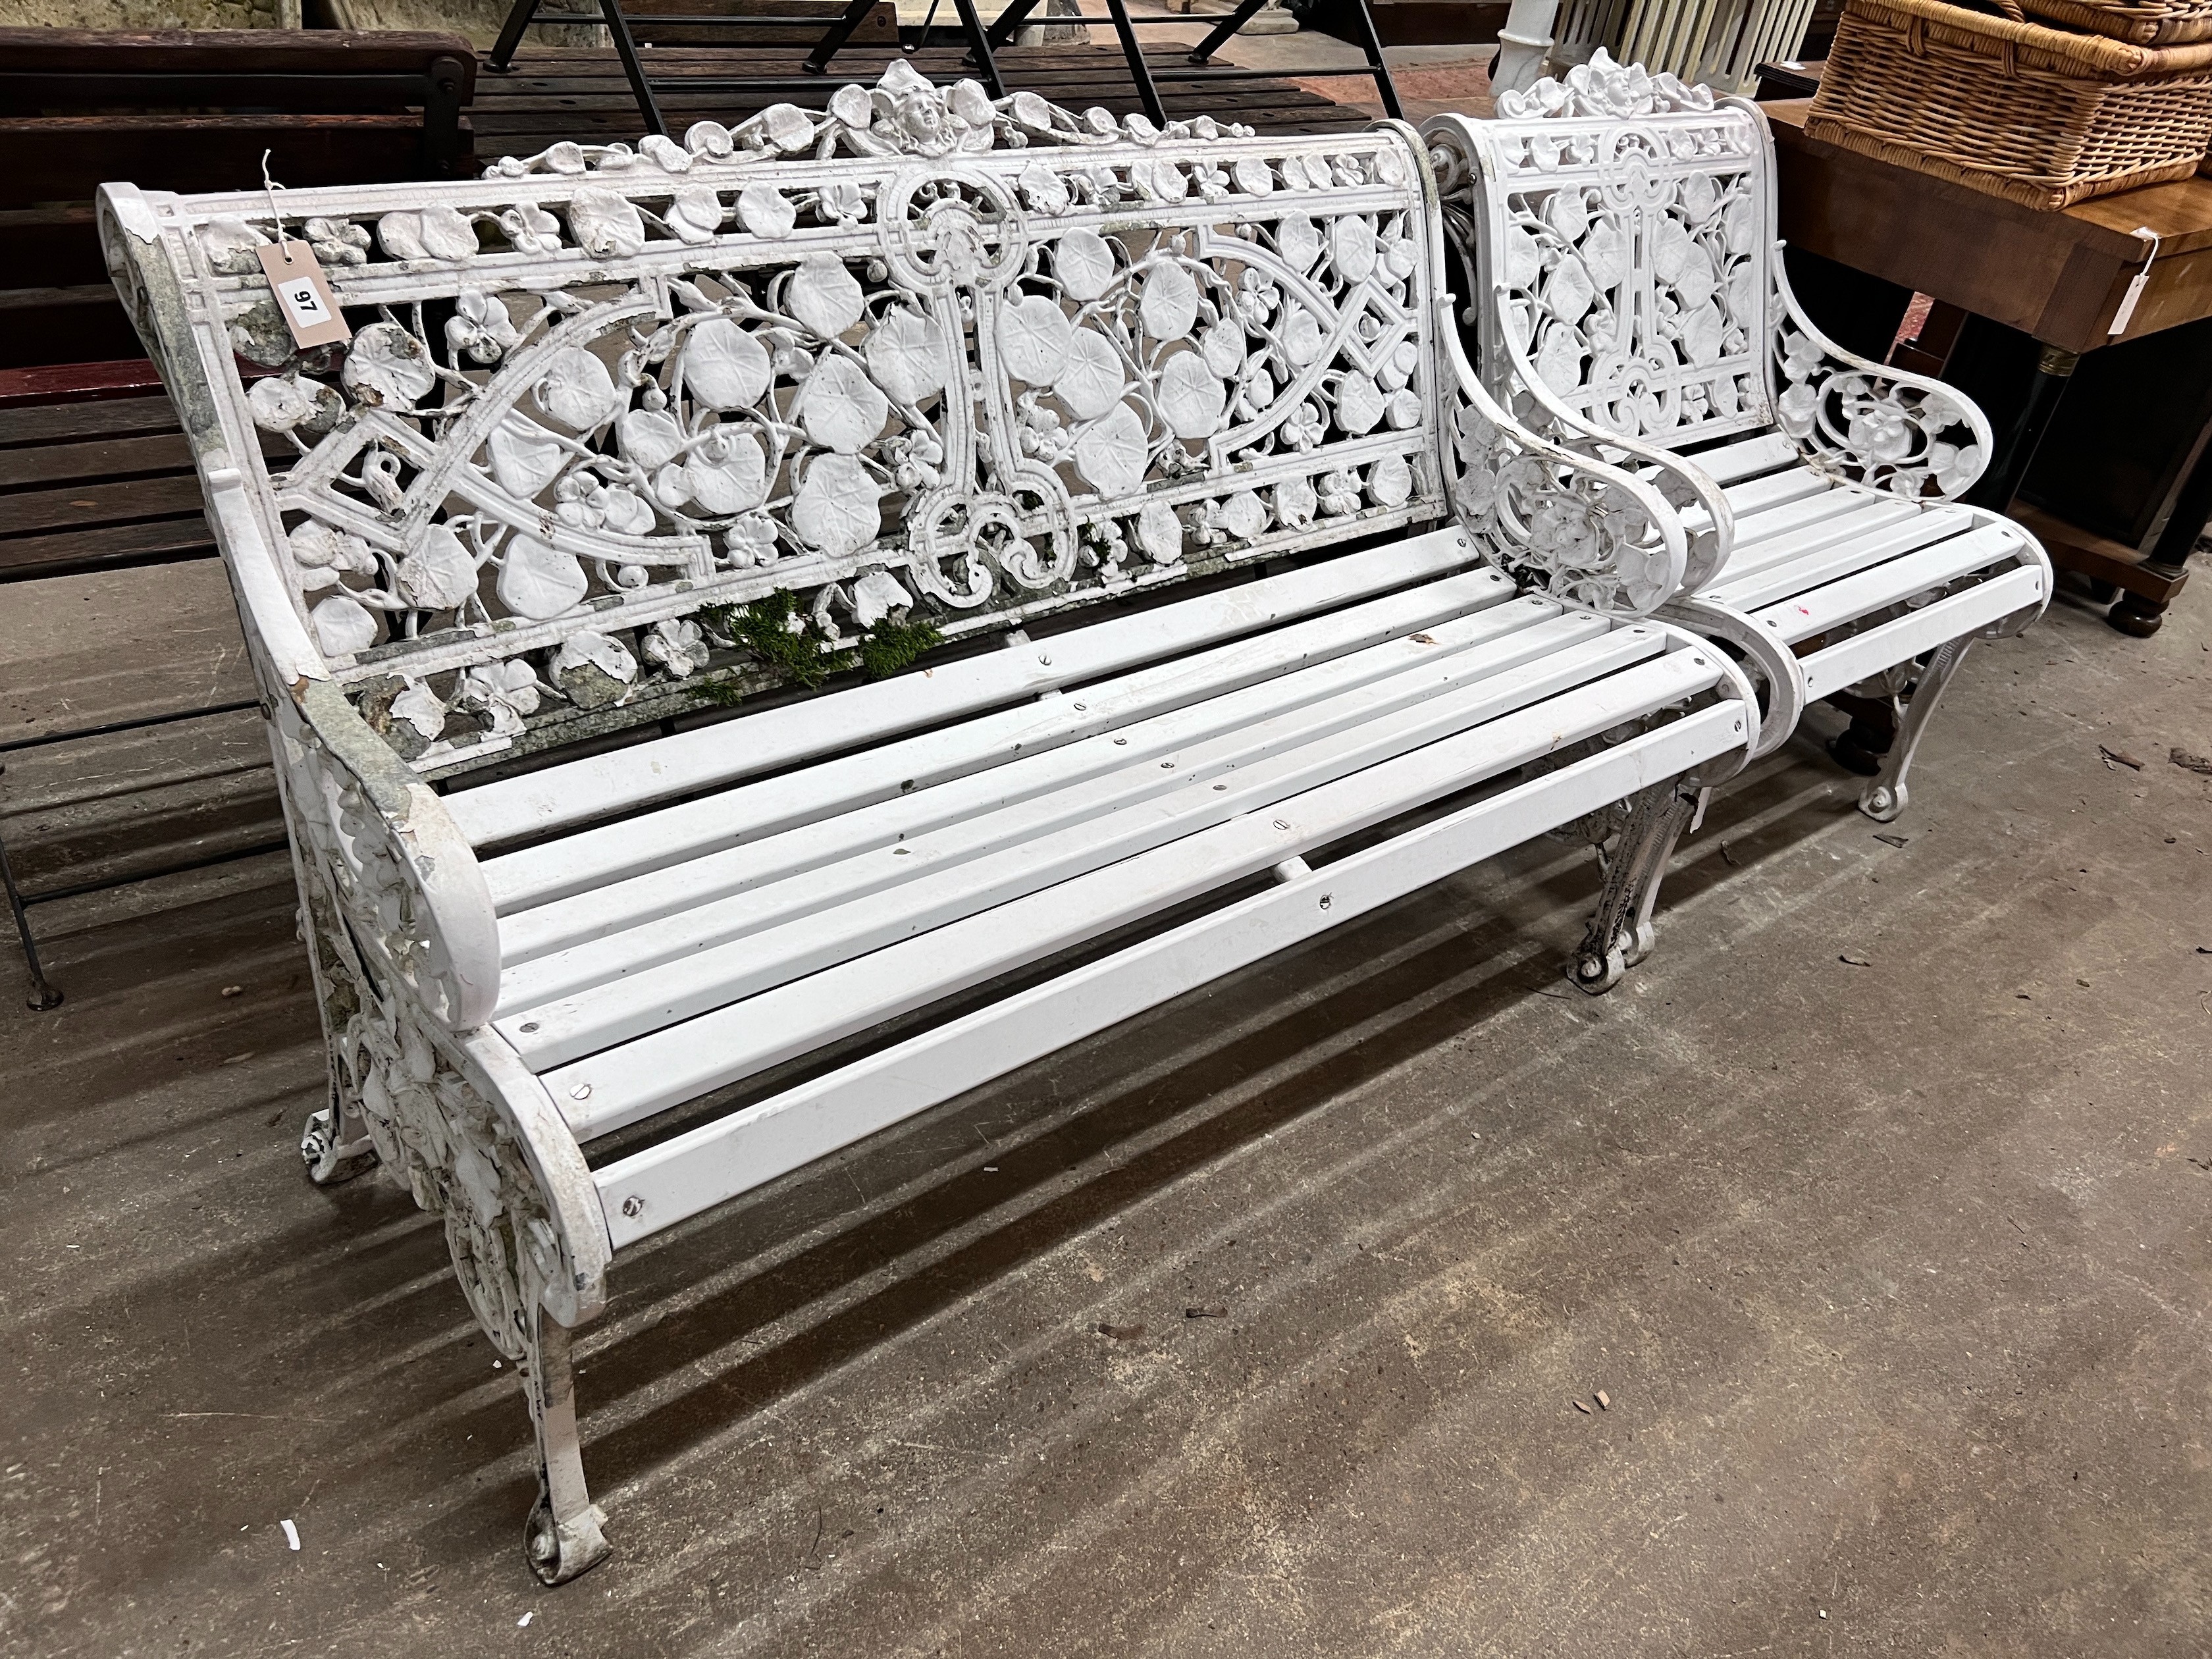 A Victorian style 'Lily of the Valley' pattern aluminium slatted garden bench, length 128cm, depth 68cm, height 82cm and a chair *Please note the sale commences at 9am.